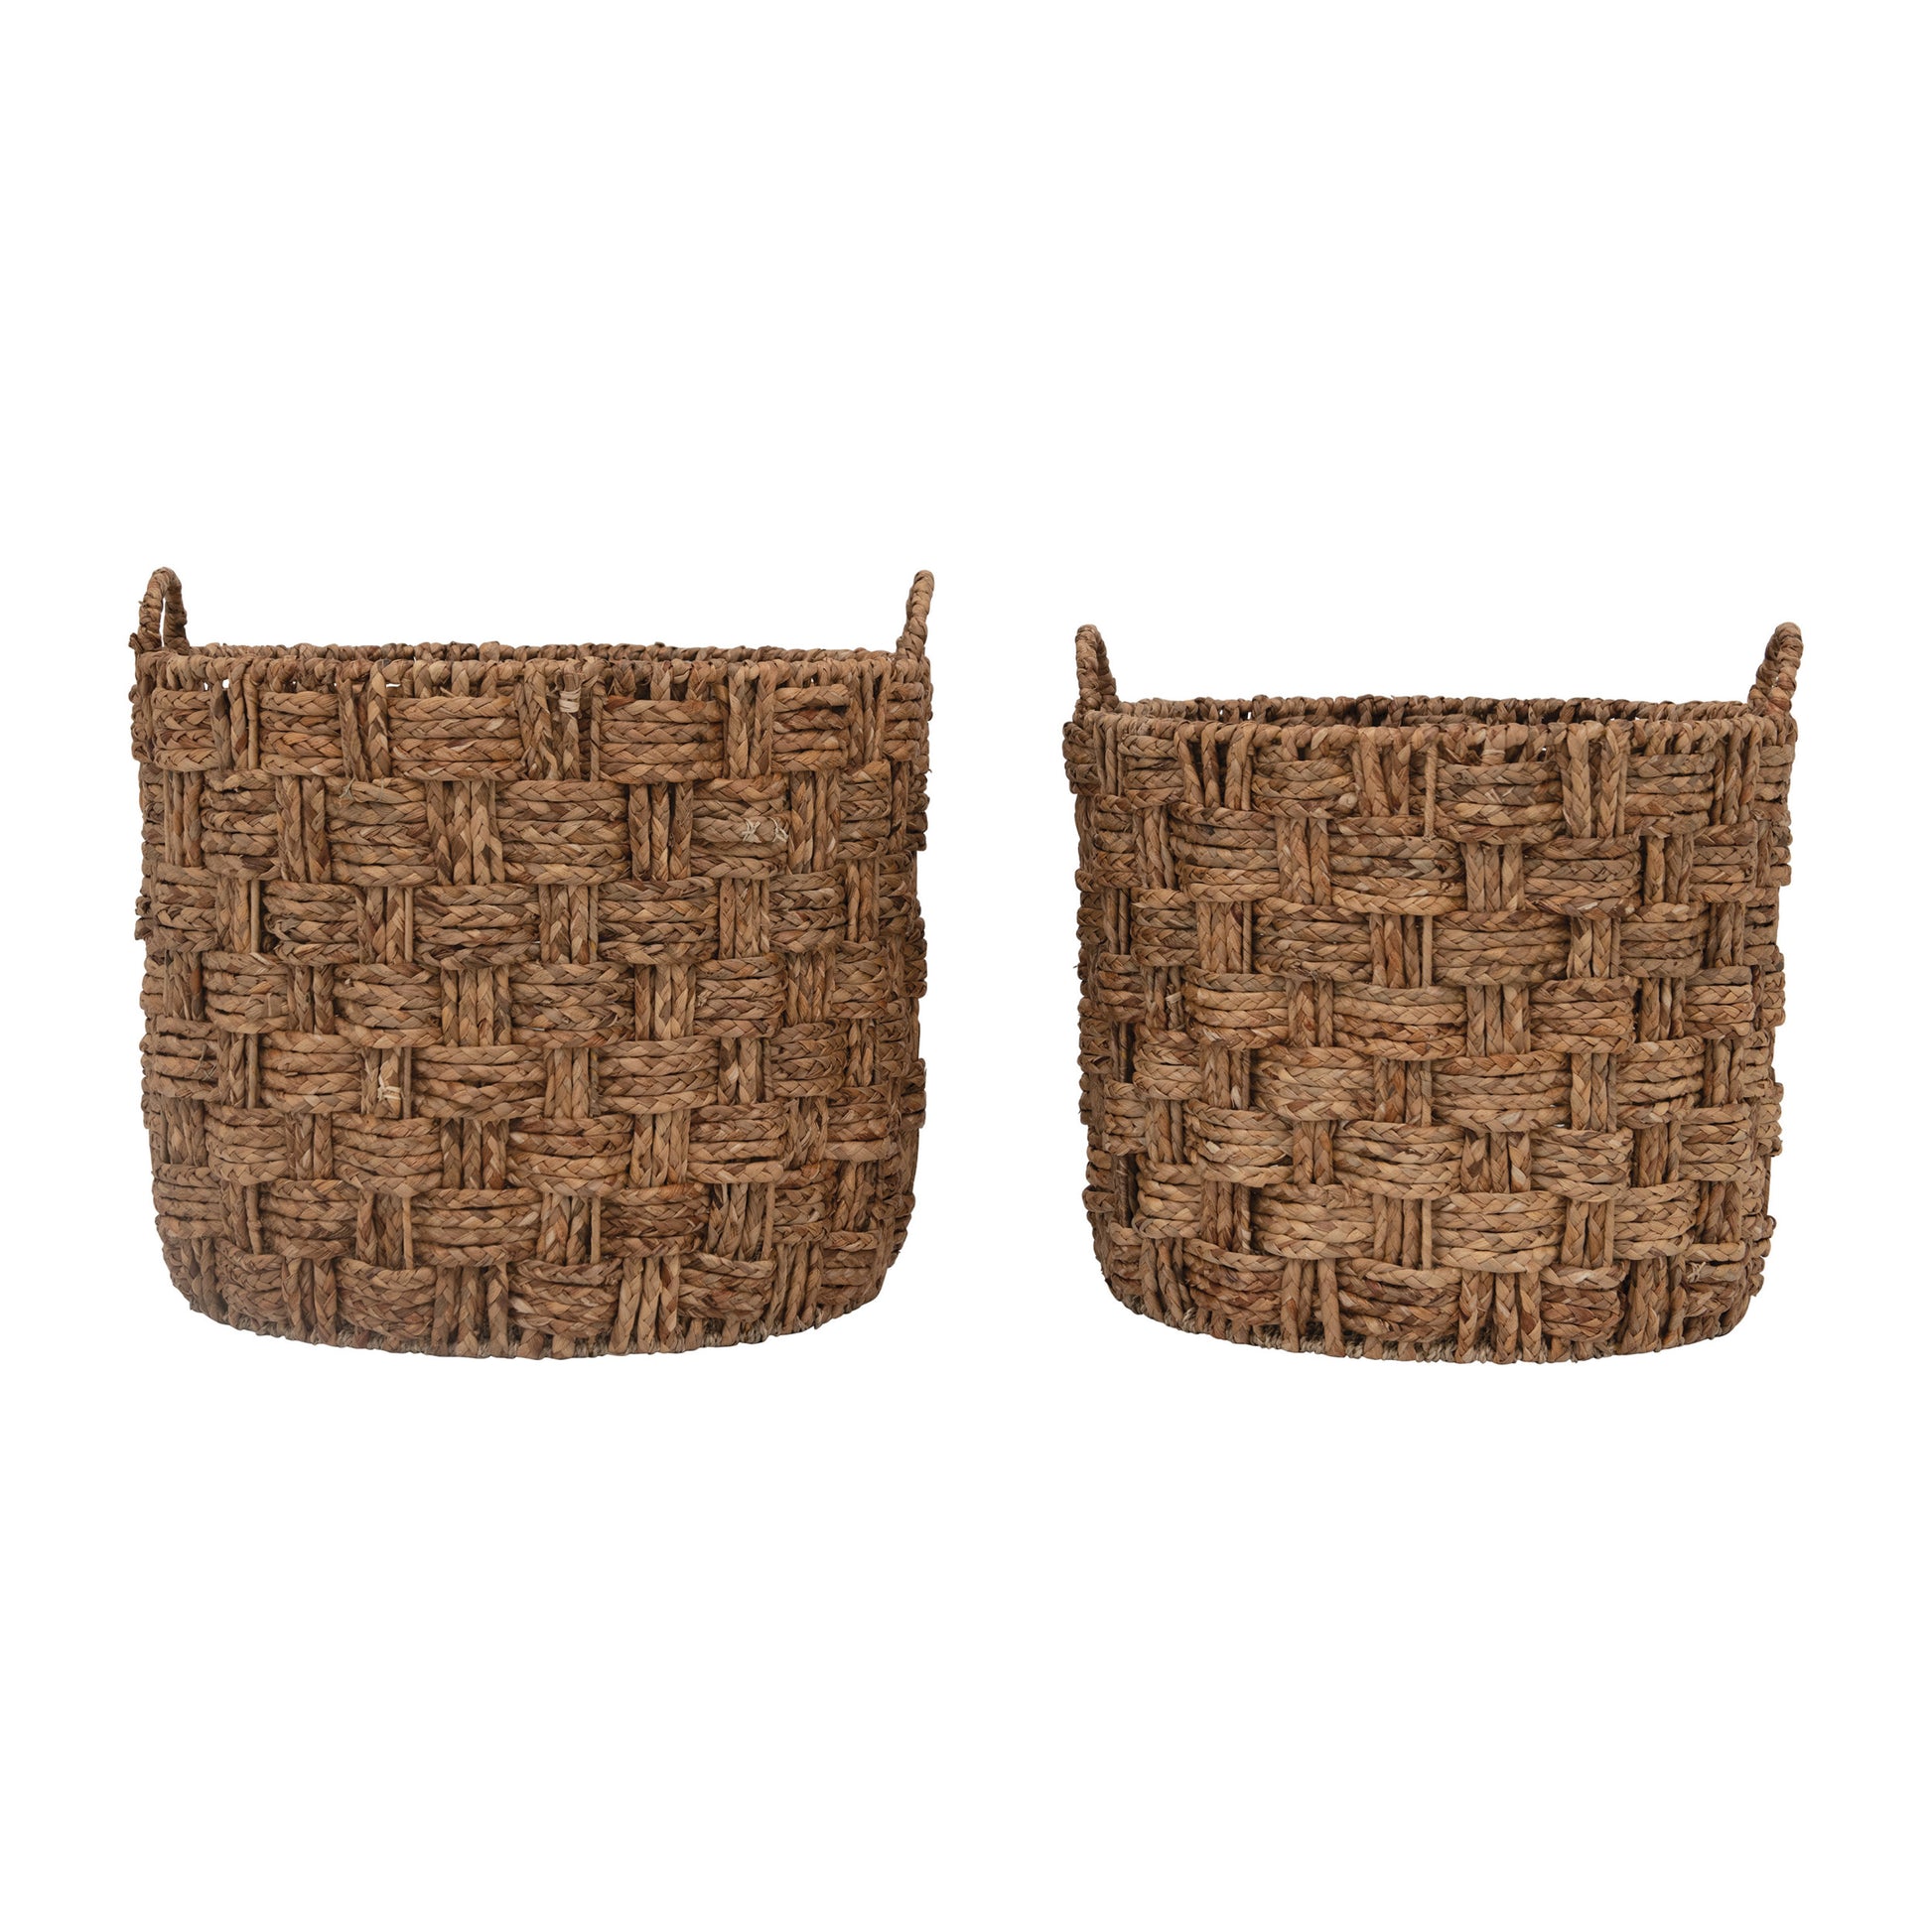 Hand-Woven Seagrass and Metal Baskets, feathered farmhouse 